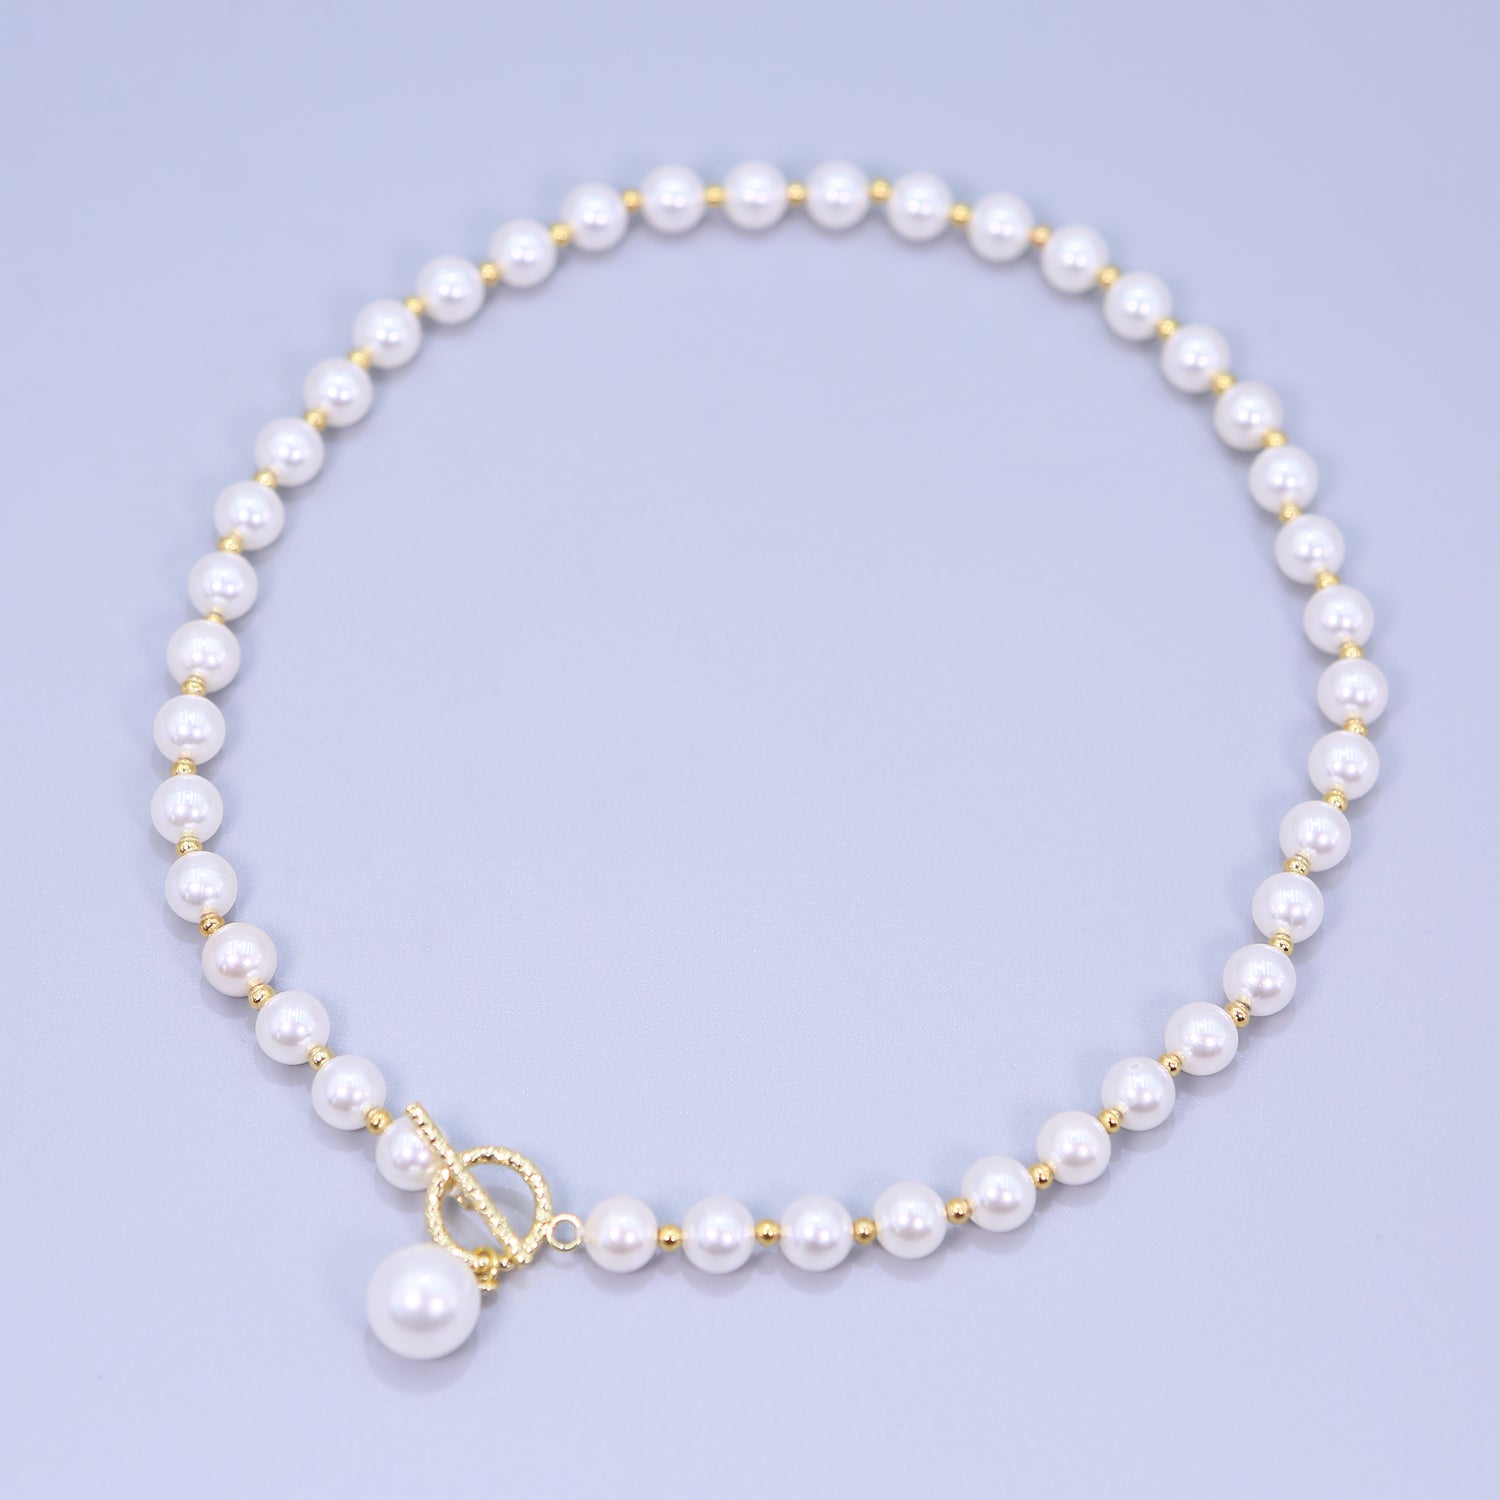 Mermaid Tears Artificial White Beads T-Buckle Design Fashionable and Noble Pearl Necklace